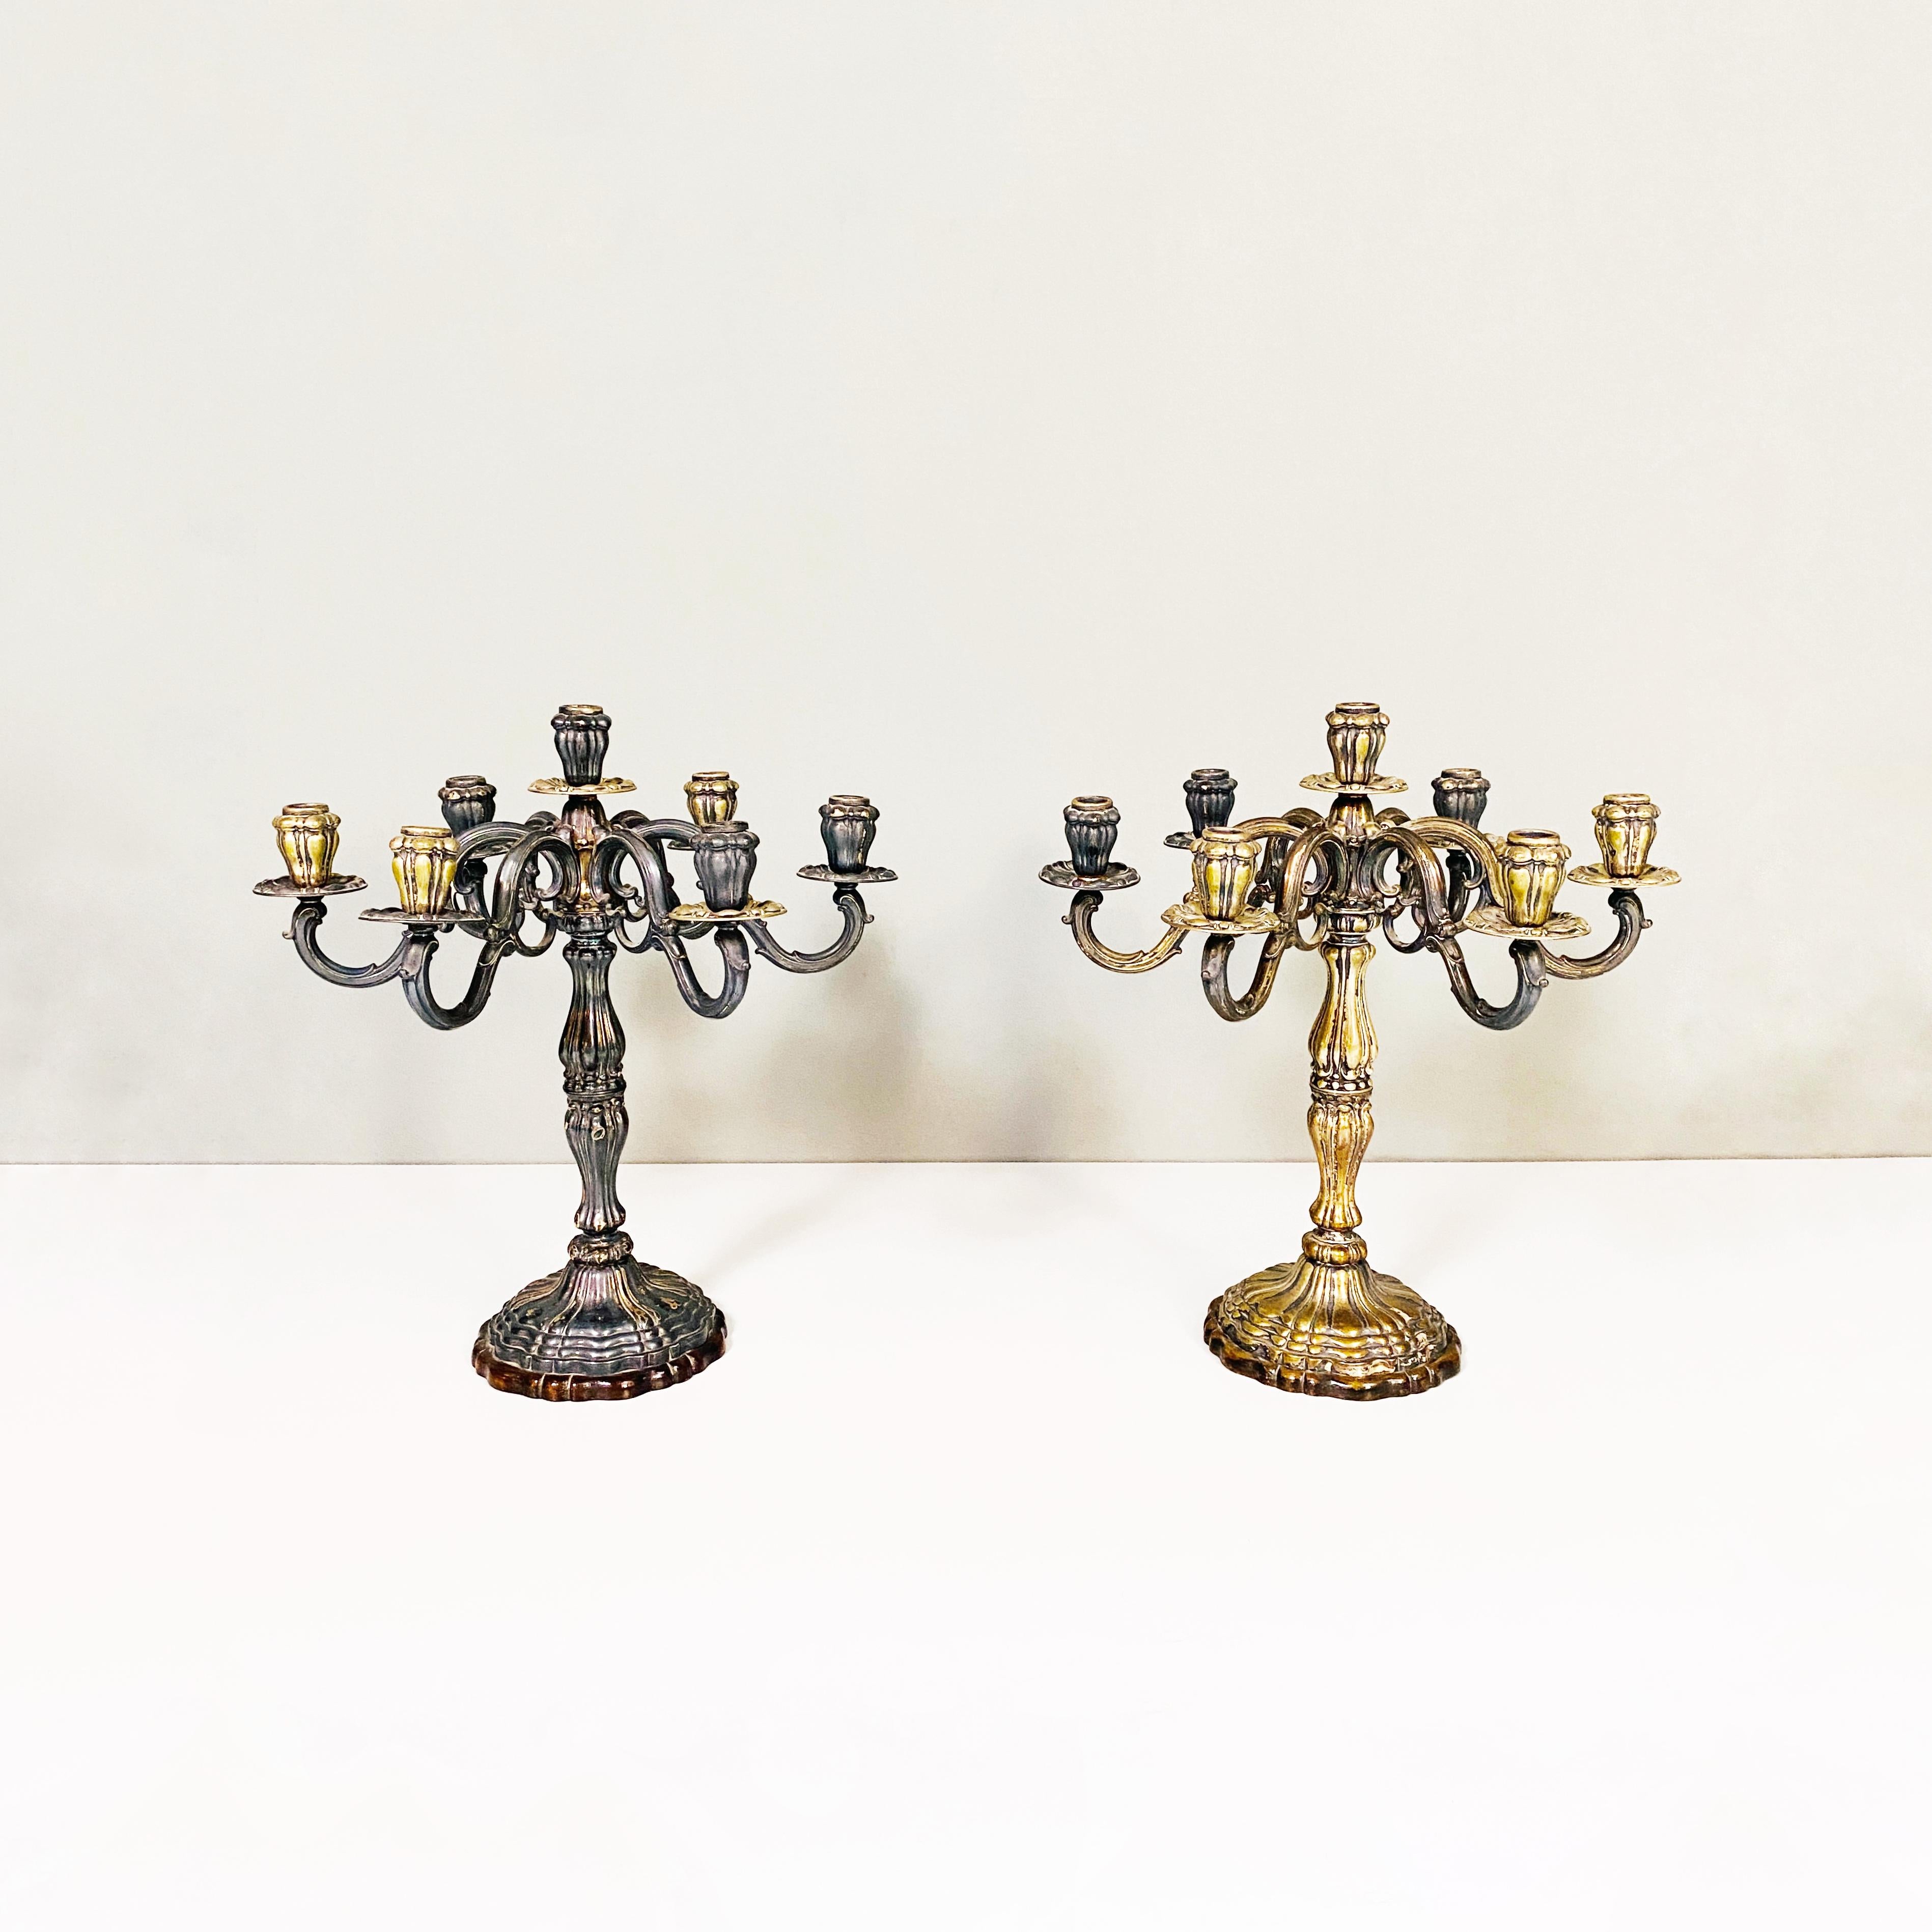 Seven-flame silver candelabras, 1880s
Silver candelabras of the late nineteenth century with seven flames and wooden base, entirely handmade.

Good conditions

Measurements in cm 46x46x49h.